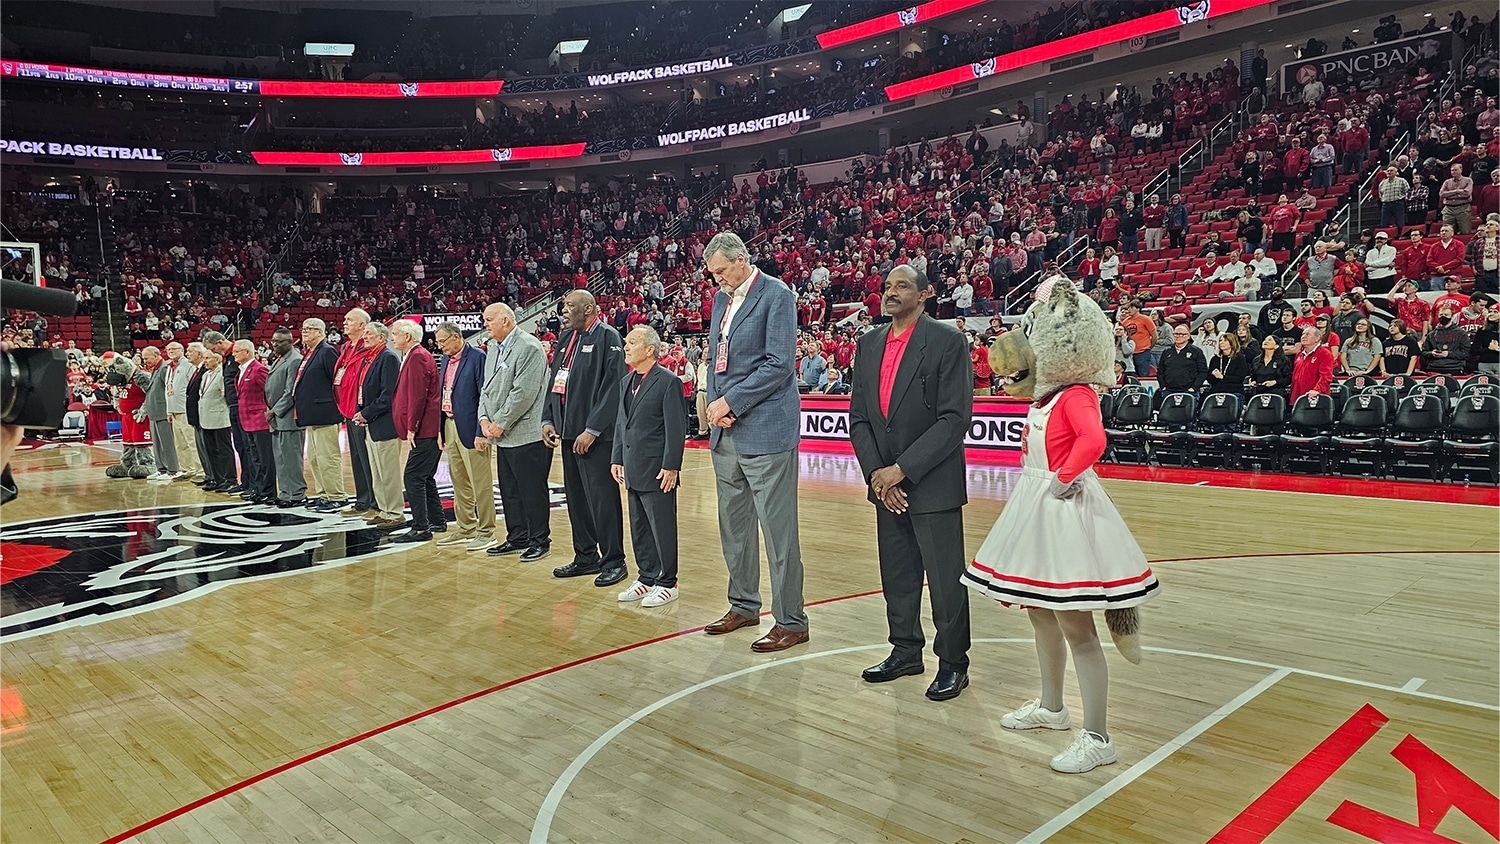 Members of NC State's 1974 NCAA Men's Basketball Championship team standing on the court of PNC Arena to be recognized for their accomplishment.